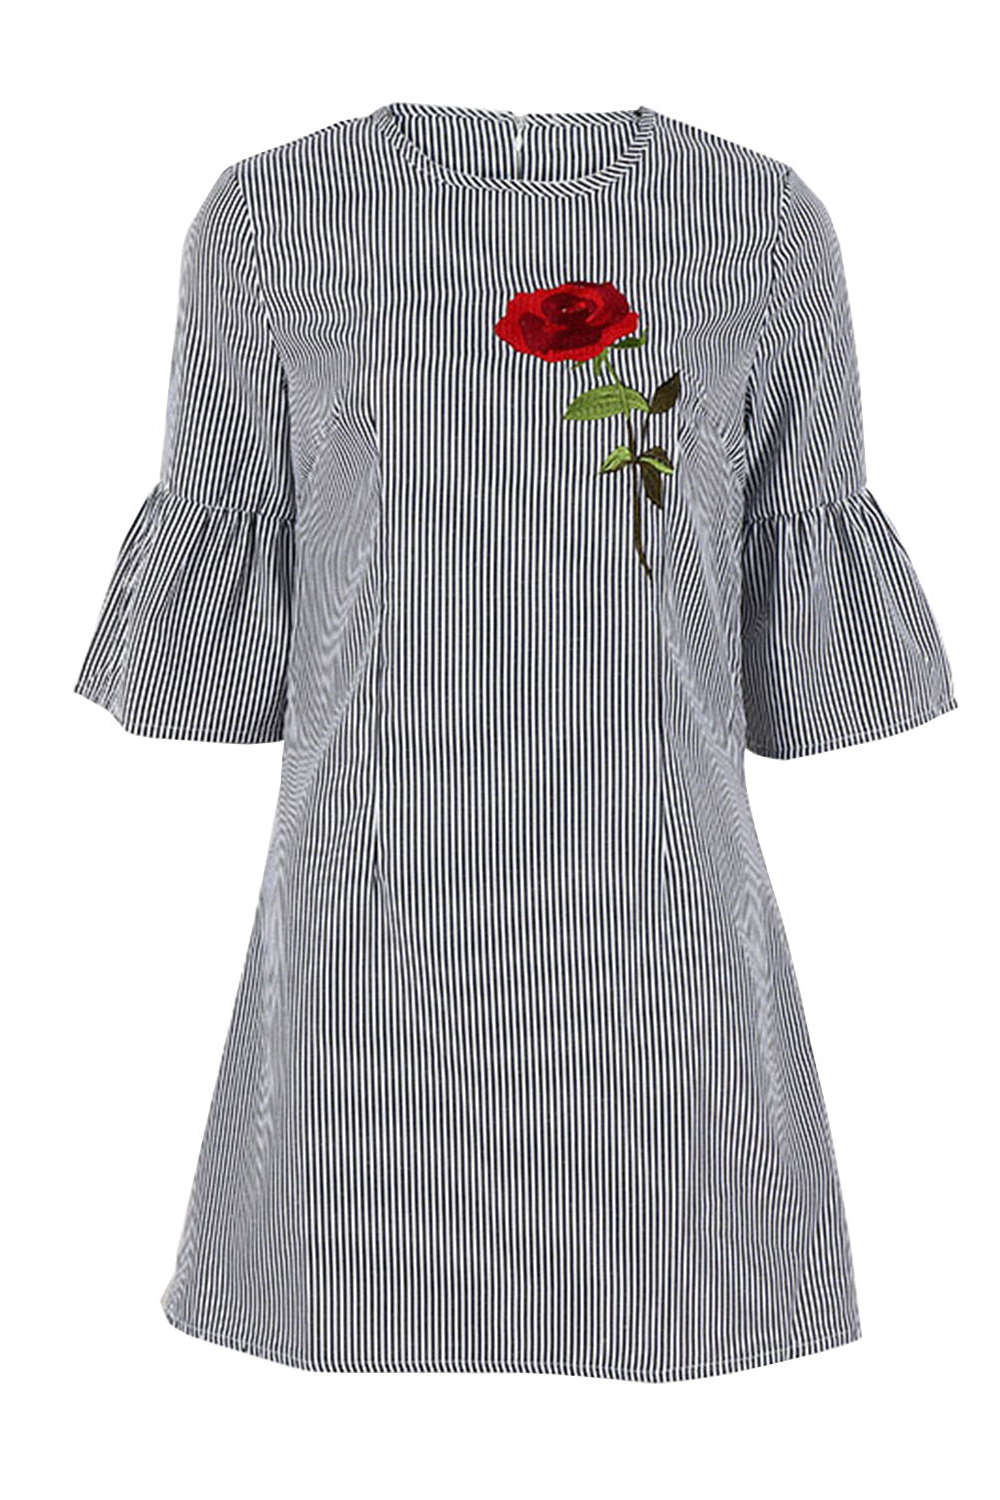 Iyasson Bell Sleeve Rose Embroidery A-Line Dress